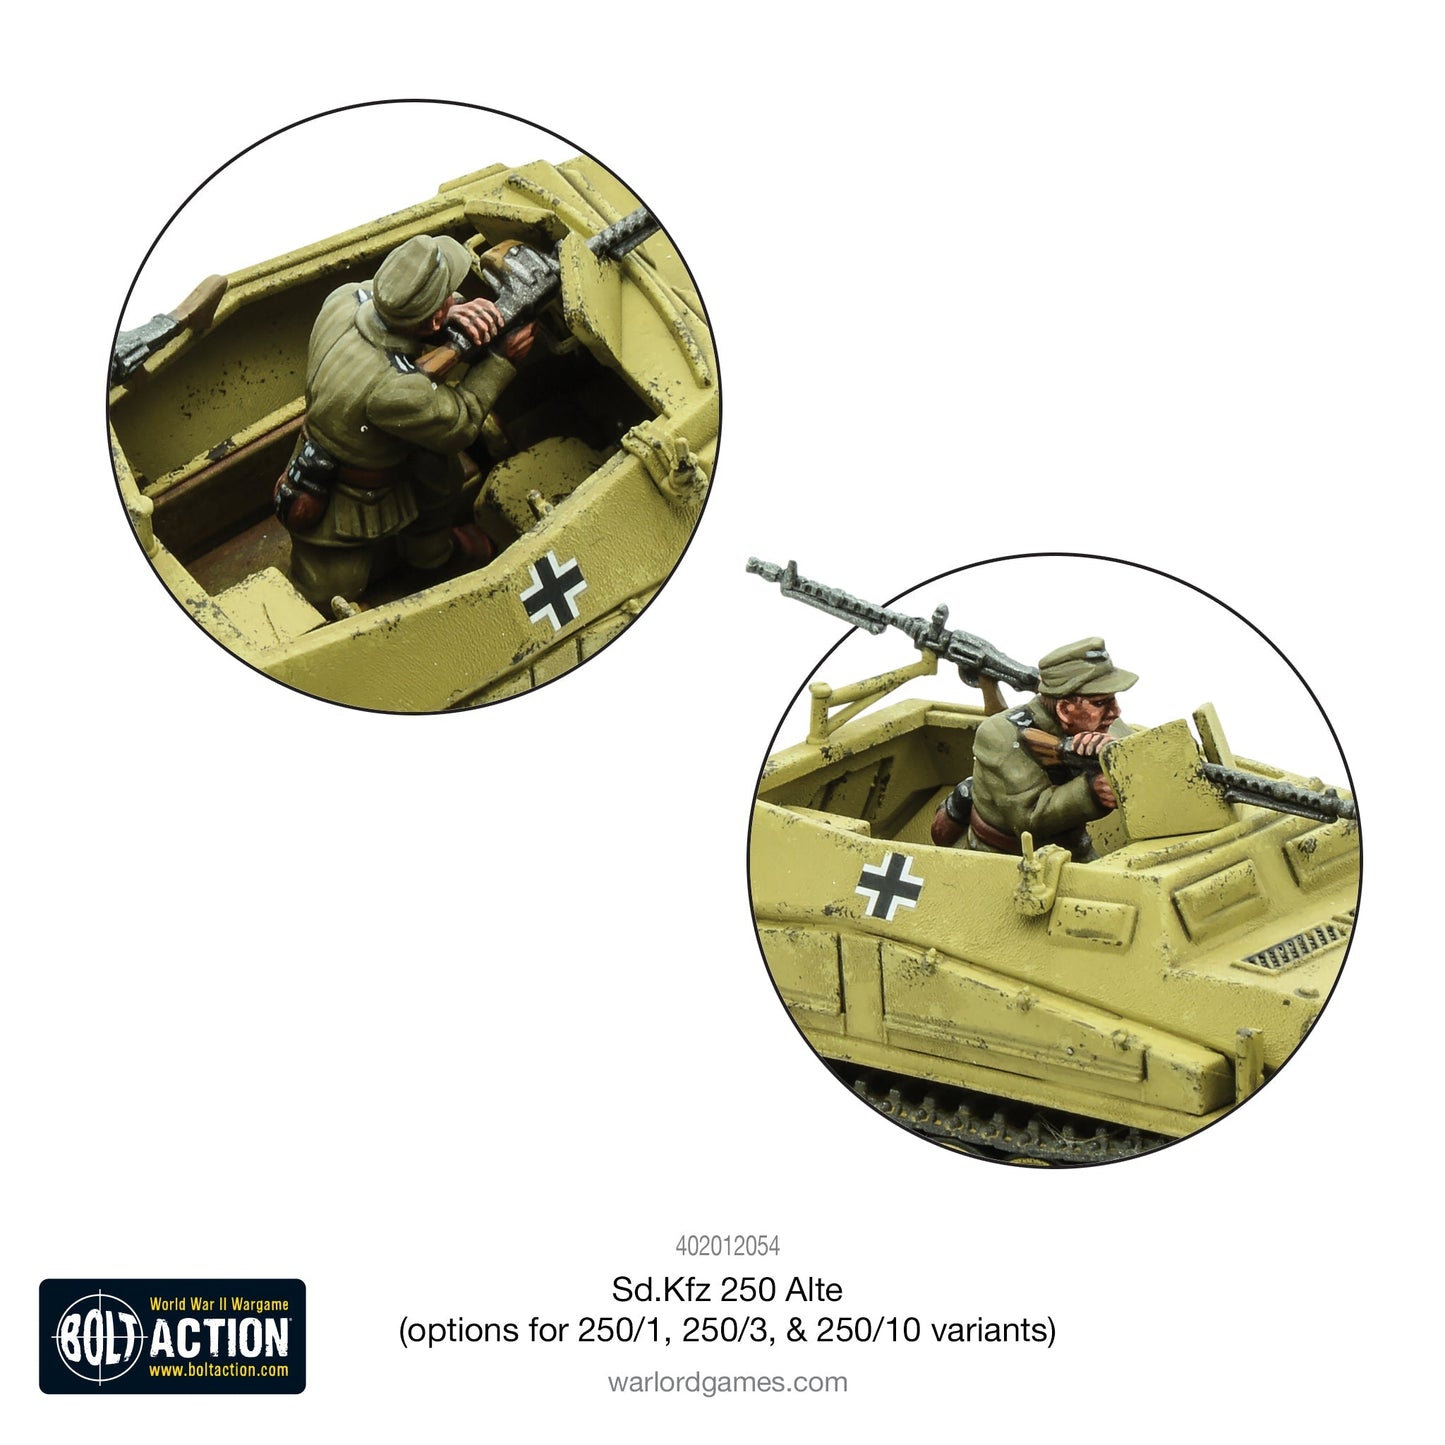 Sd.Kfz 250 (Alte) Half-Track (Options To Make 250/1, 250/3 Or 250/10 Variants)